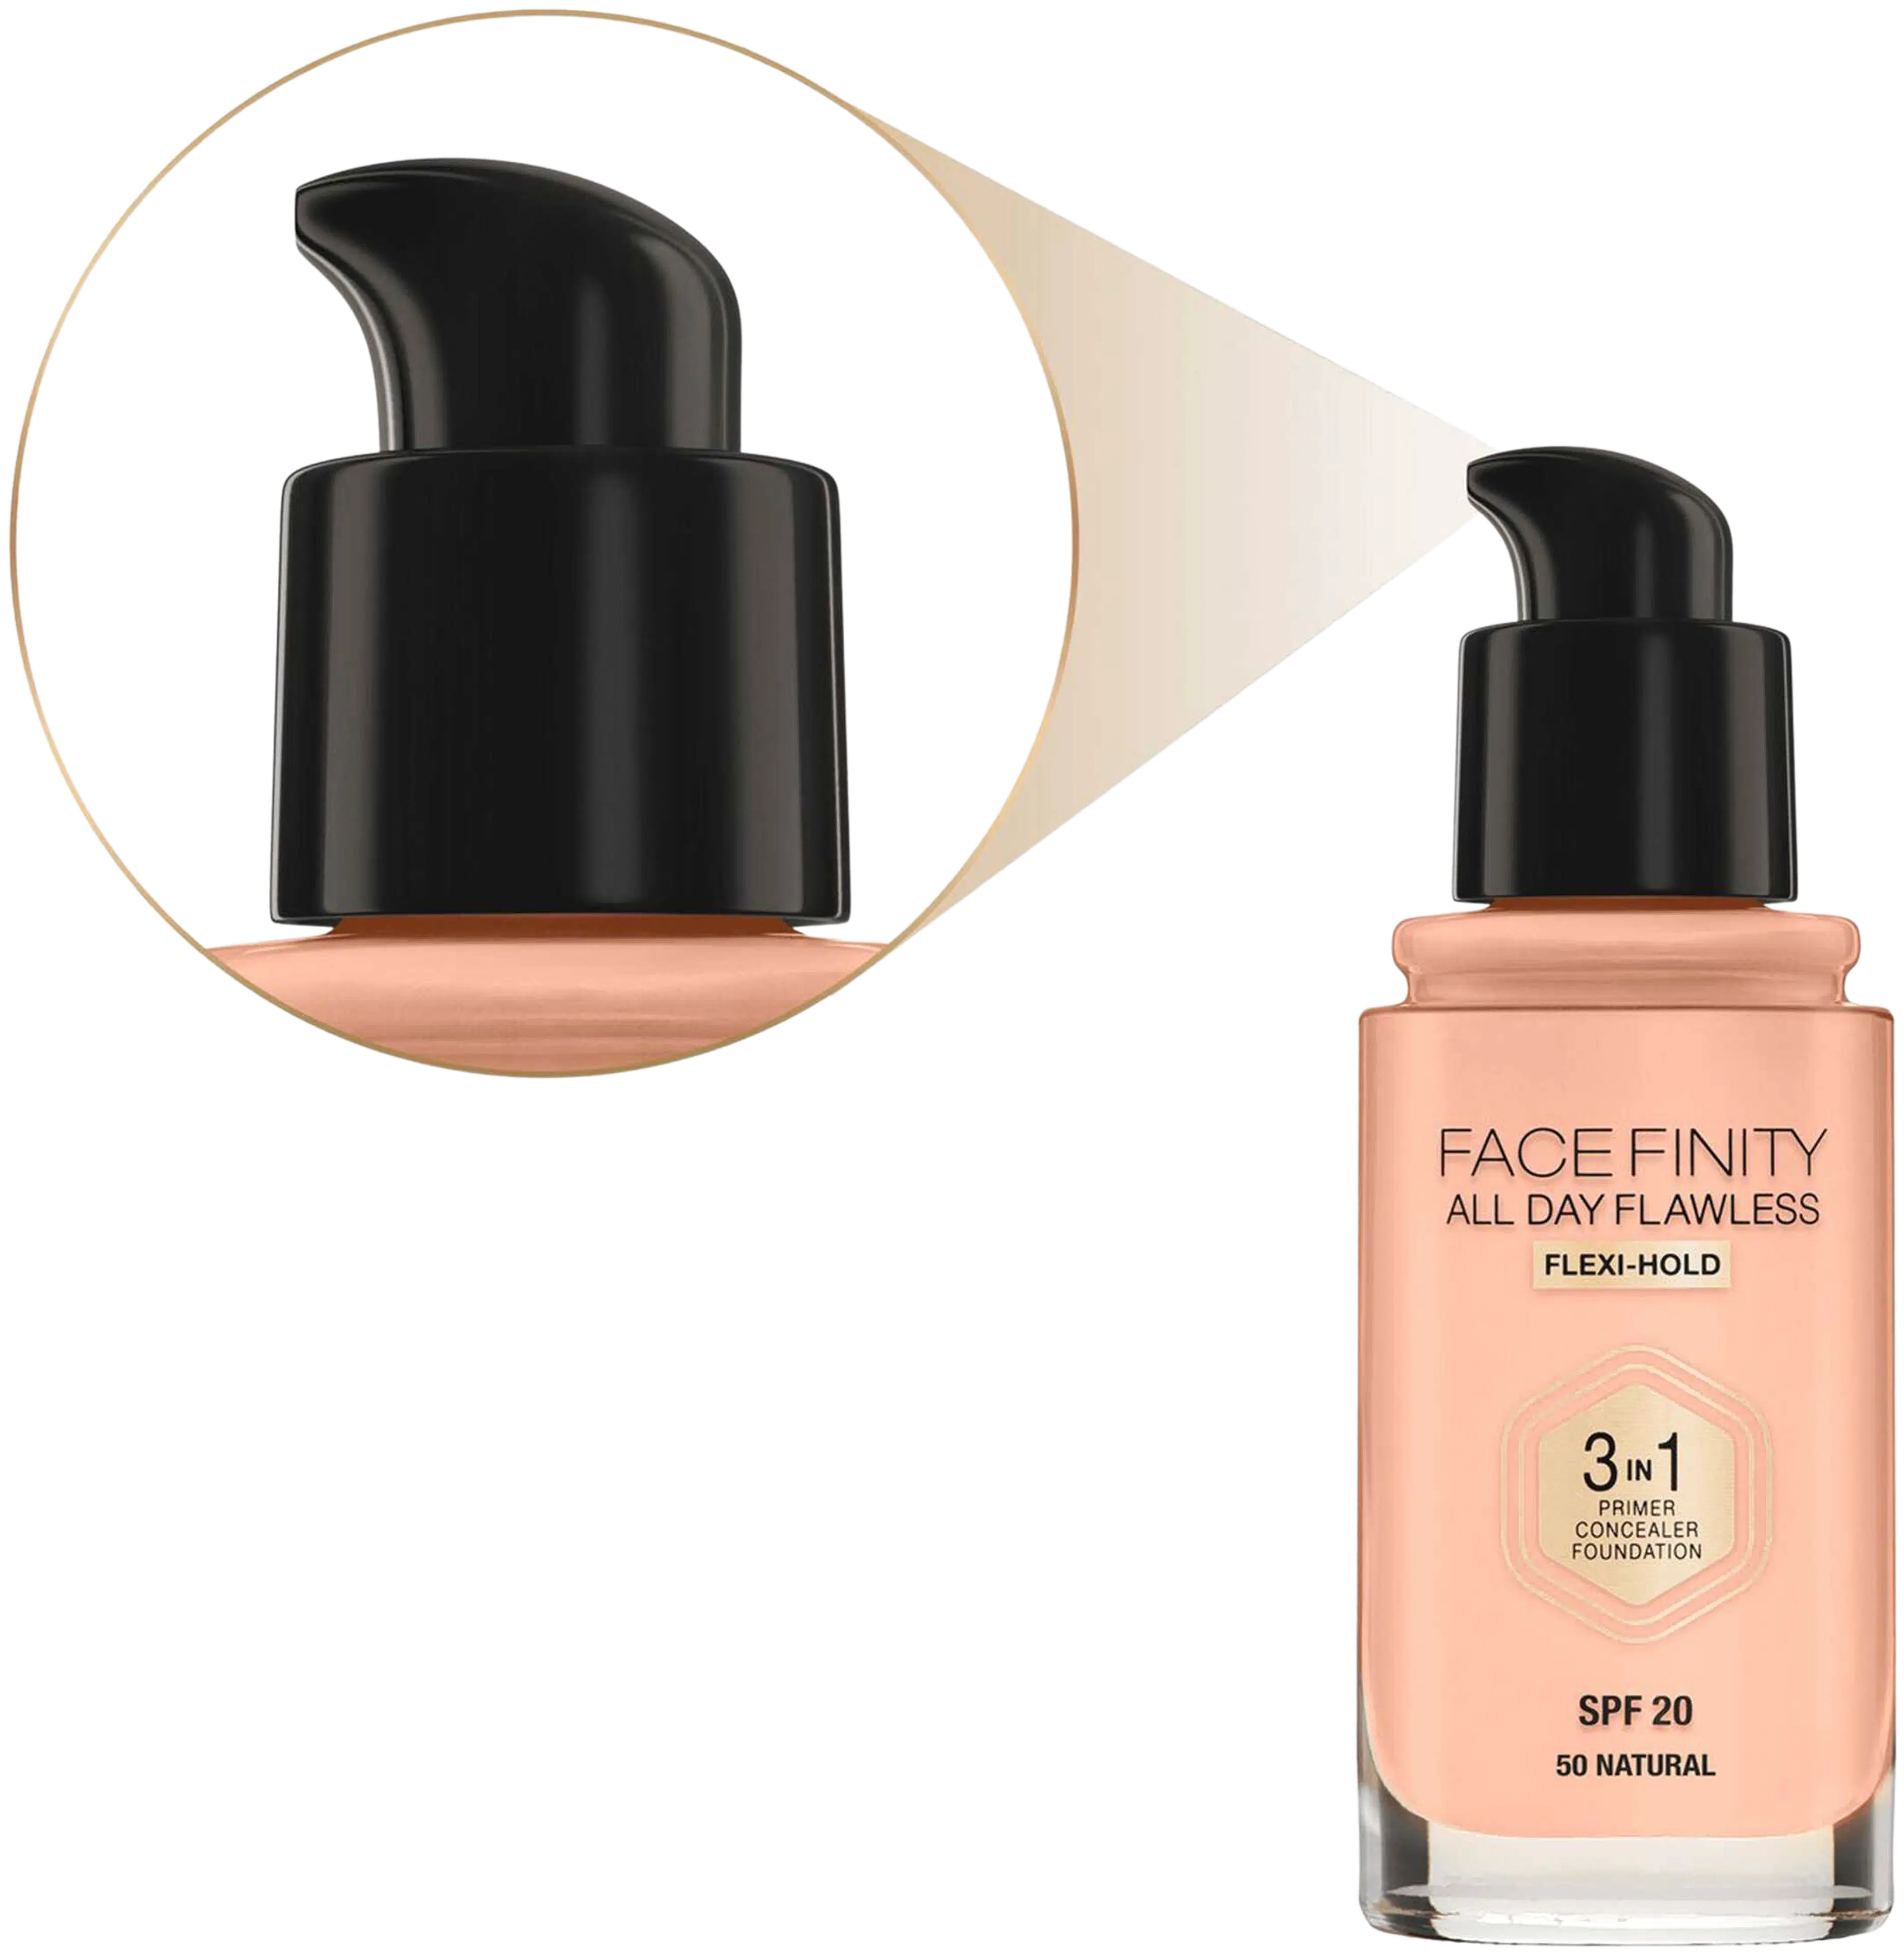 Max Factor Facefinity All Day Flawless 3in1 Foundation 50 Natural 30ml